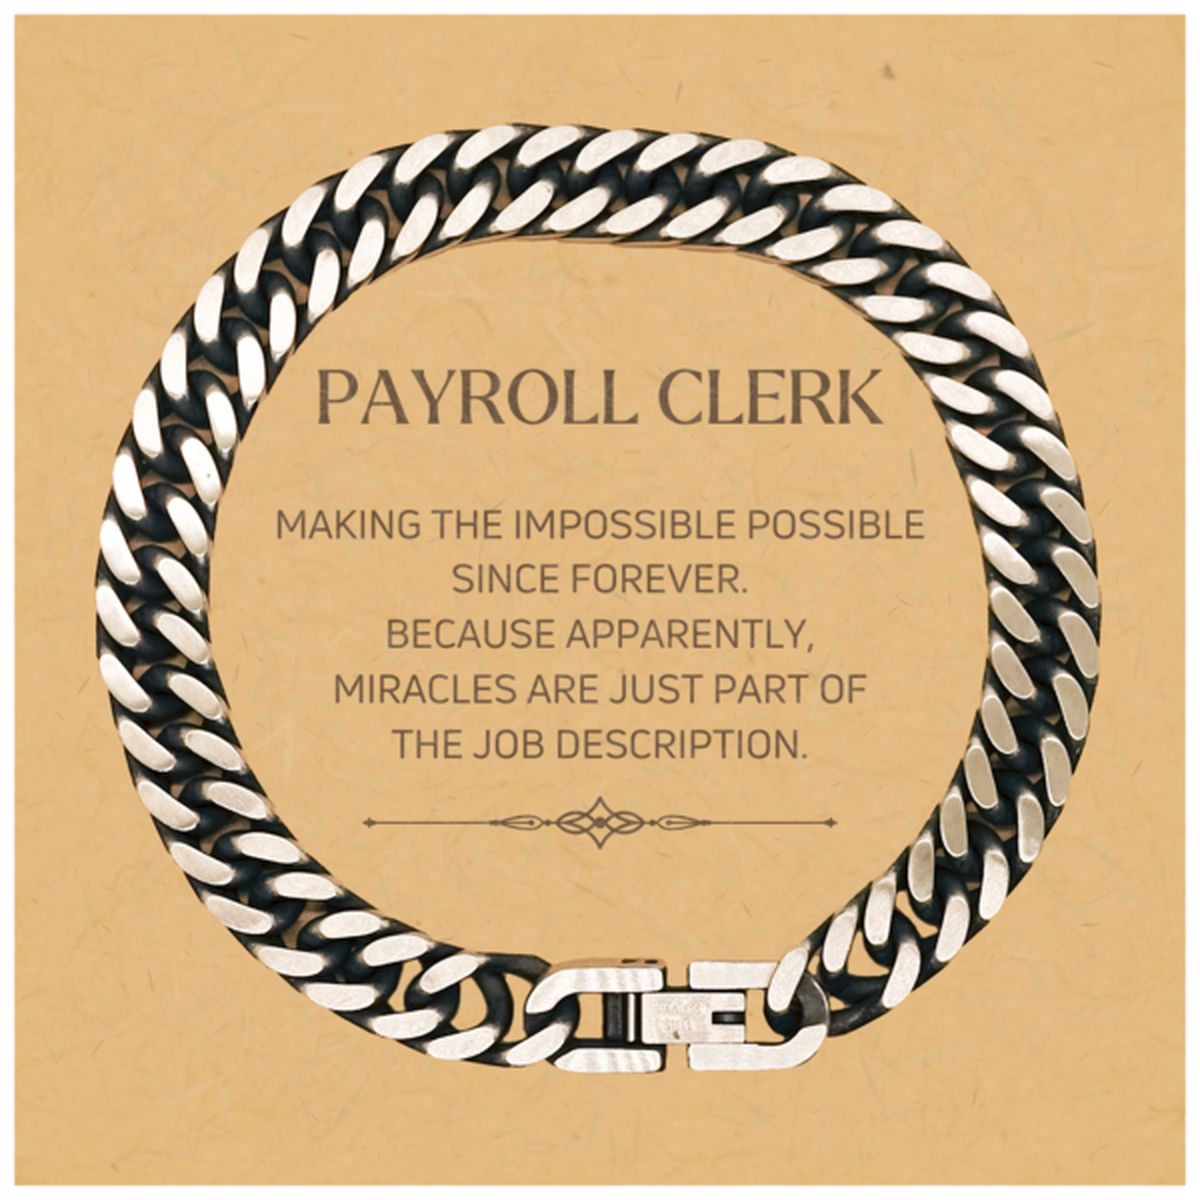 Funny Payroll Clerk Gifts, Miracles are just part of the job description, Inspirational Birthday Christmas Cuban Link Chain Bracelet For Payroll Clerk, Men, Women, Coworkers, Friends, Boss